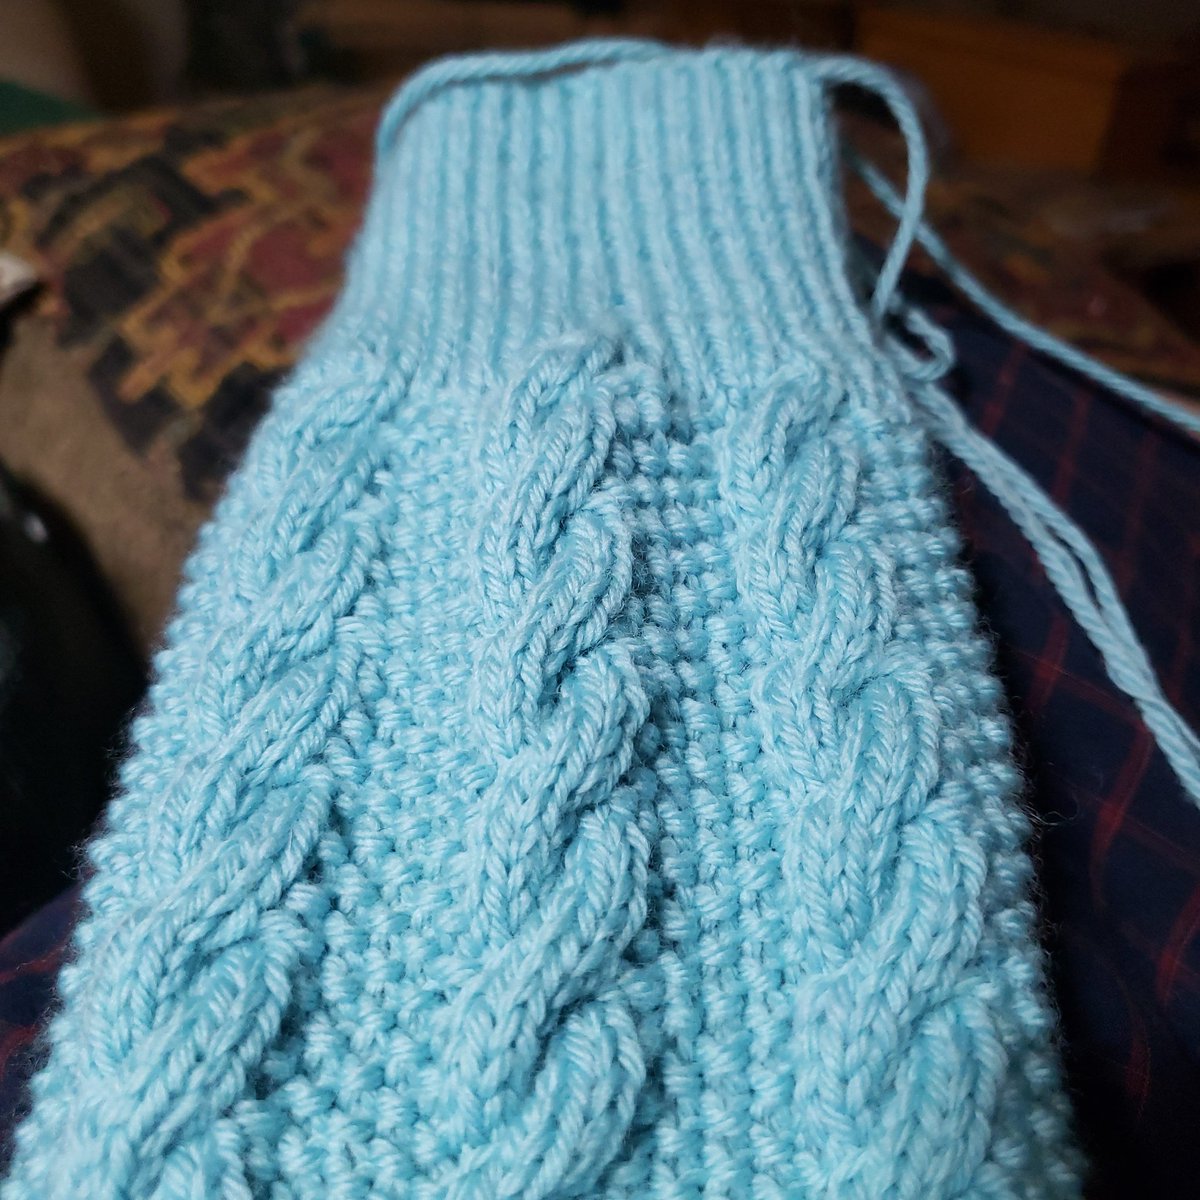 Working up some #cableknitting  socks for a customer.
Design: Mine
Yarn: @cascade220yarn 
Let me make you a pair!
#mindfulknitting. #PositiveVibesOnly 
#doingwhatilove